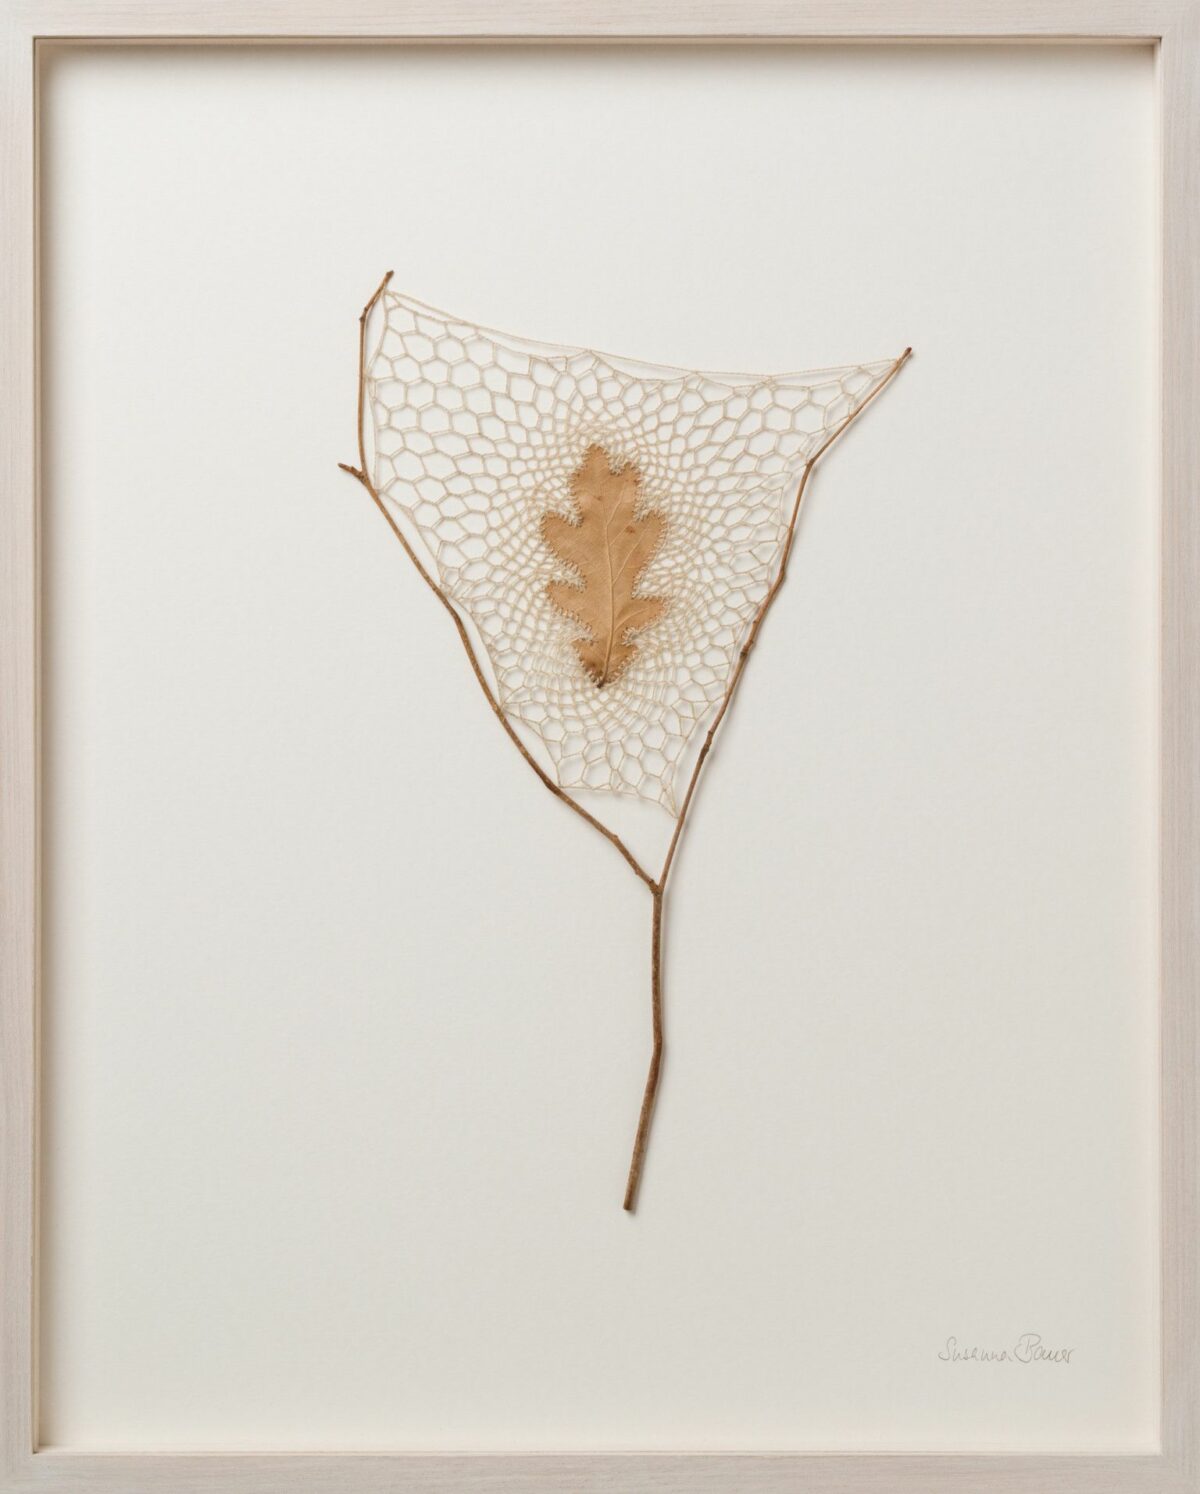 Beautiful Sculptures Of Dried Leaves Crocheted Delicate Patterns By Susanna Bauer 27